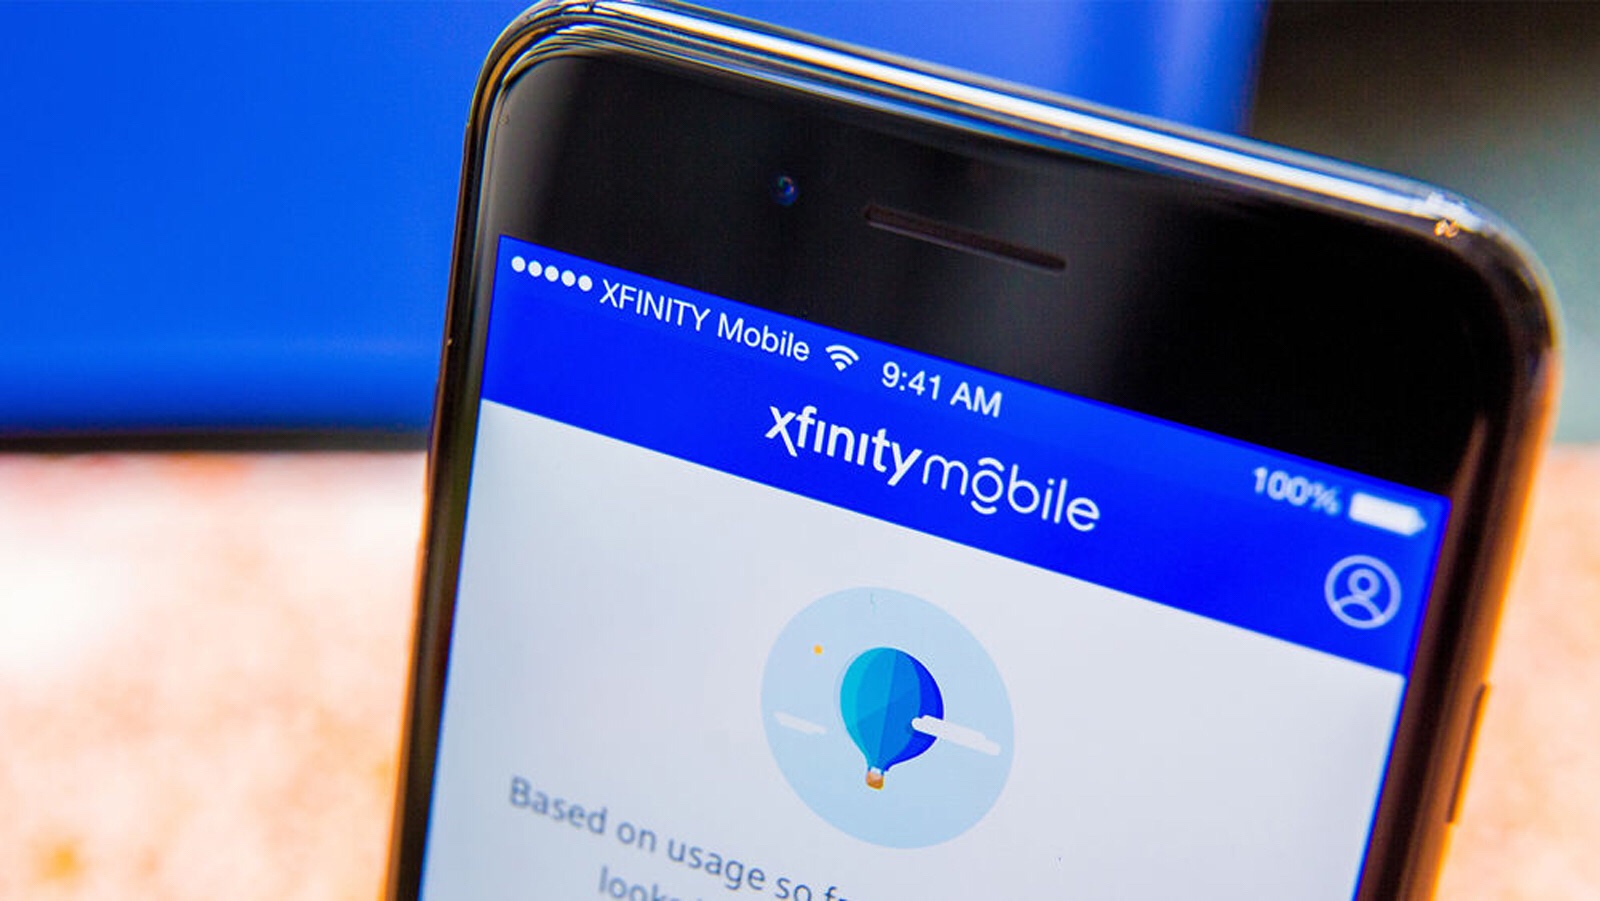 Your unlocked iPhone will now work with Xfinity Mobile